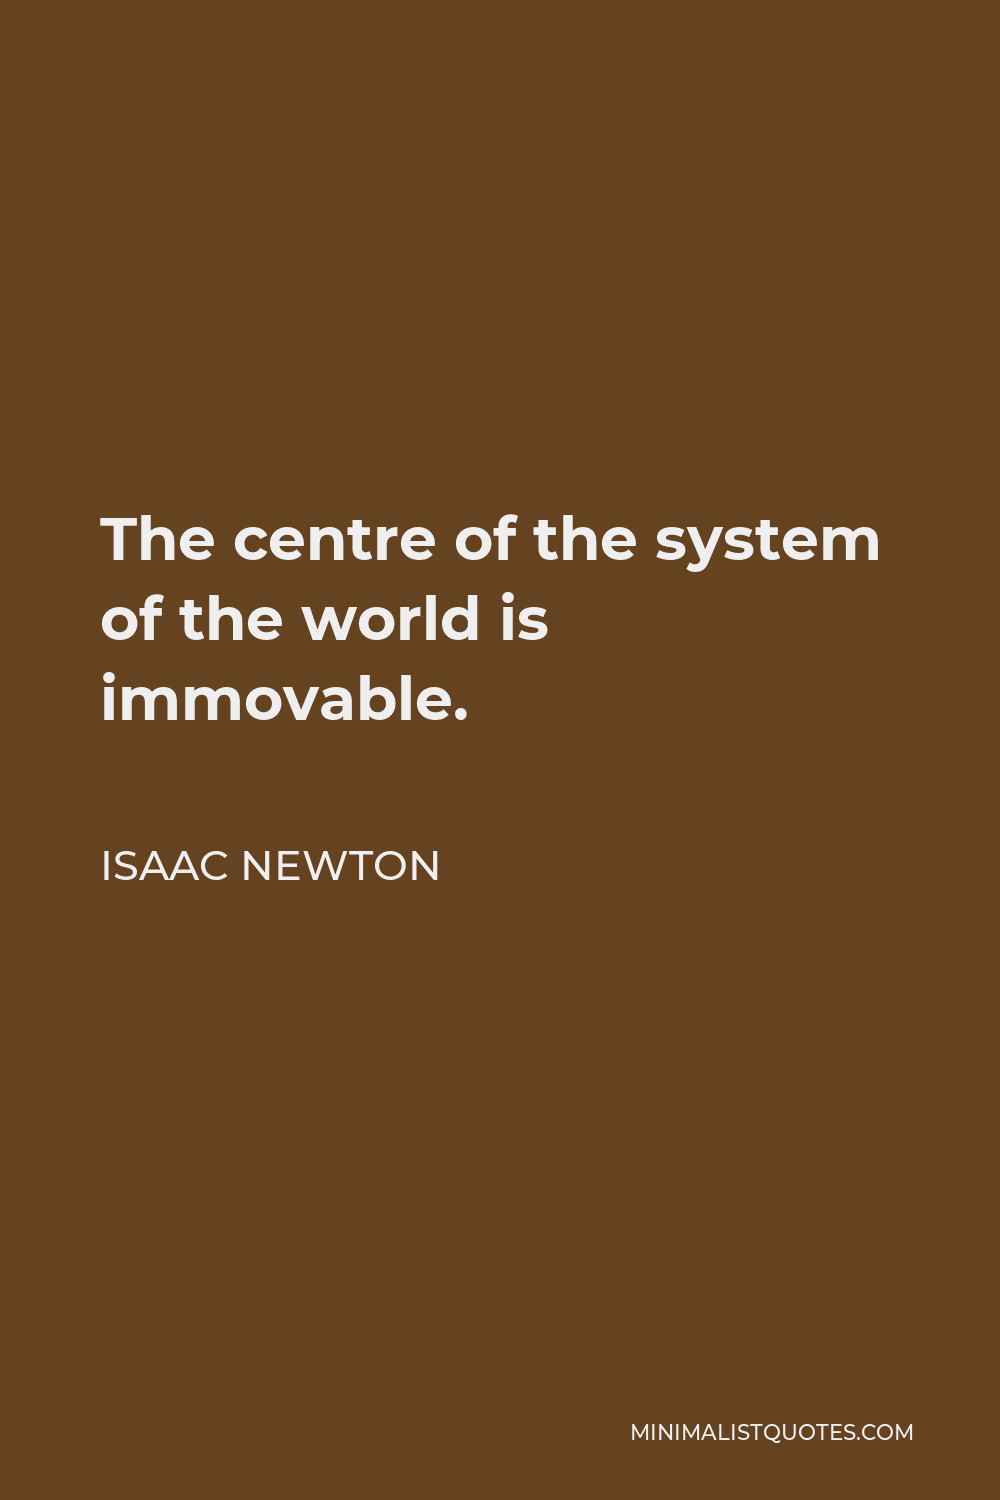 Isaac Newton Quote - The centre of the system of the world is immovable.